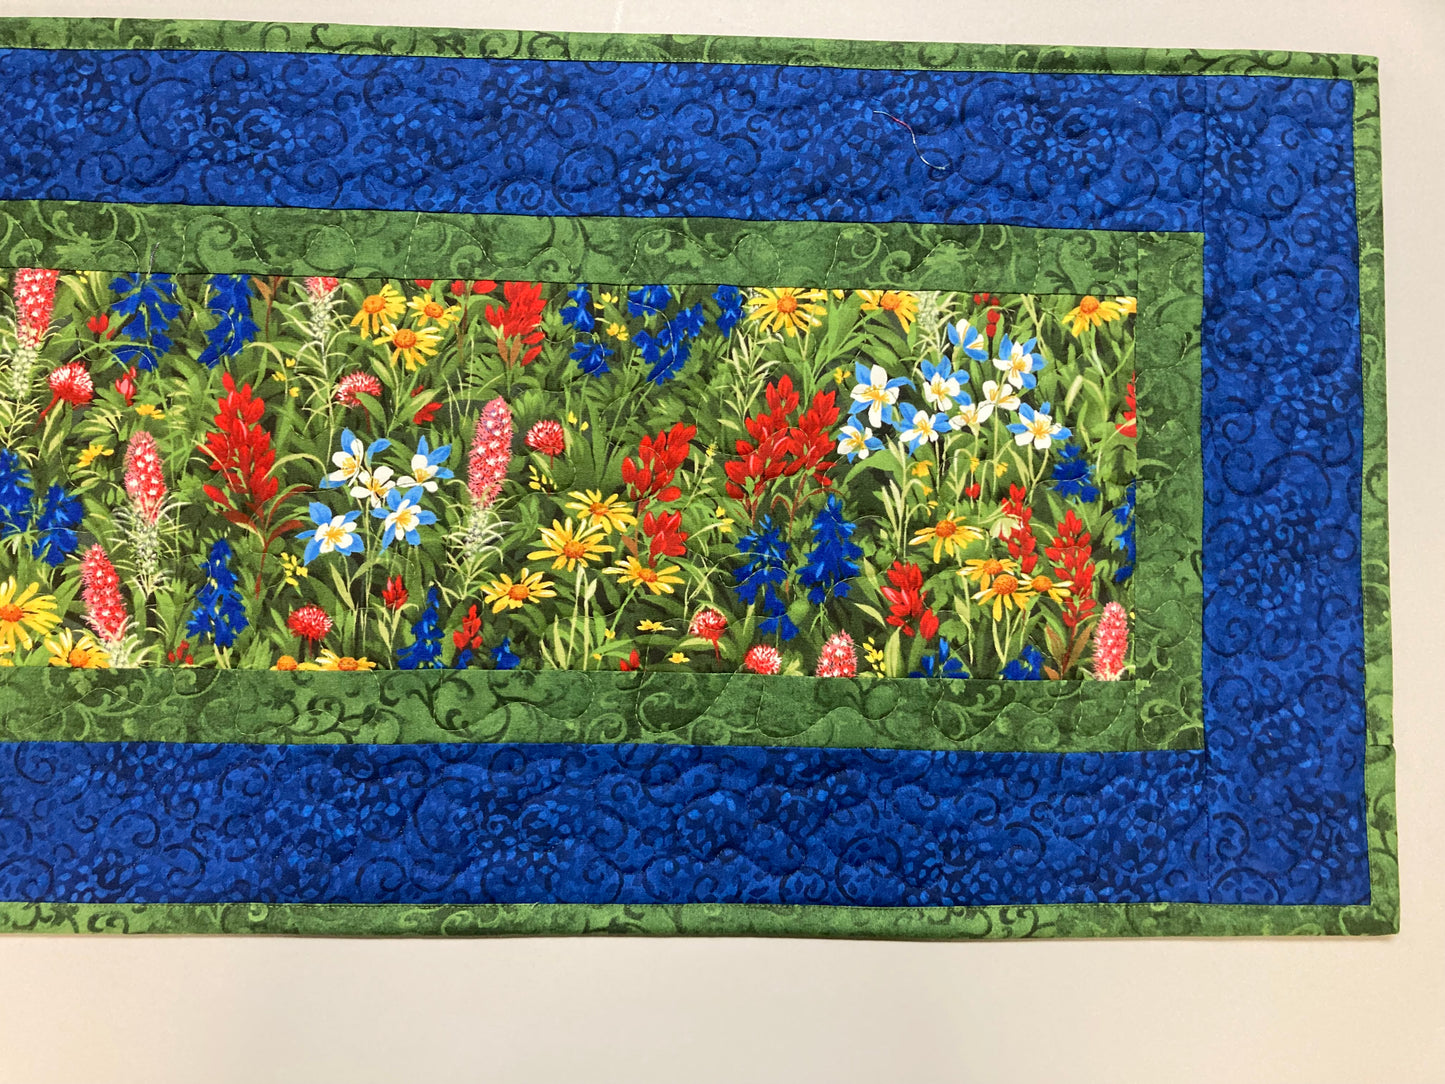 Quilted Table Runner Summer Texas Wildflowers, 13x48" Yellow Red Blue Flowers, Dining Room Coffee Table Runner, Garden Floral Everyday